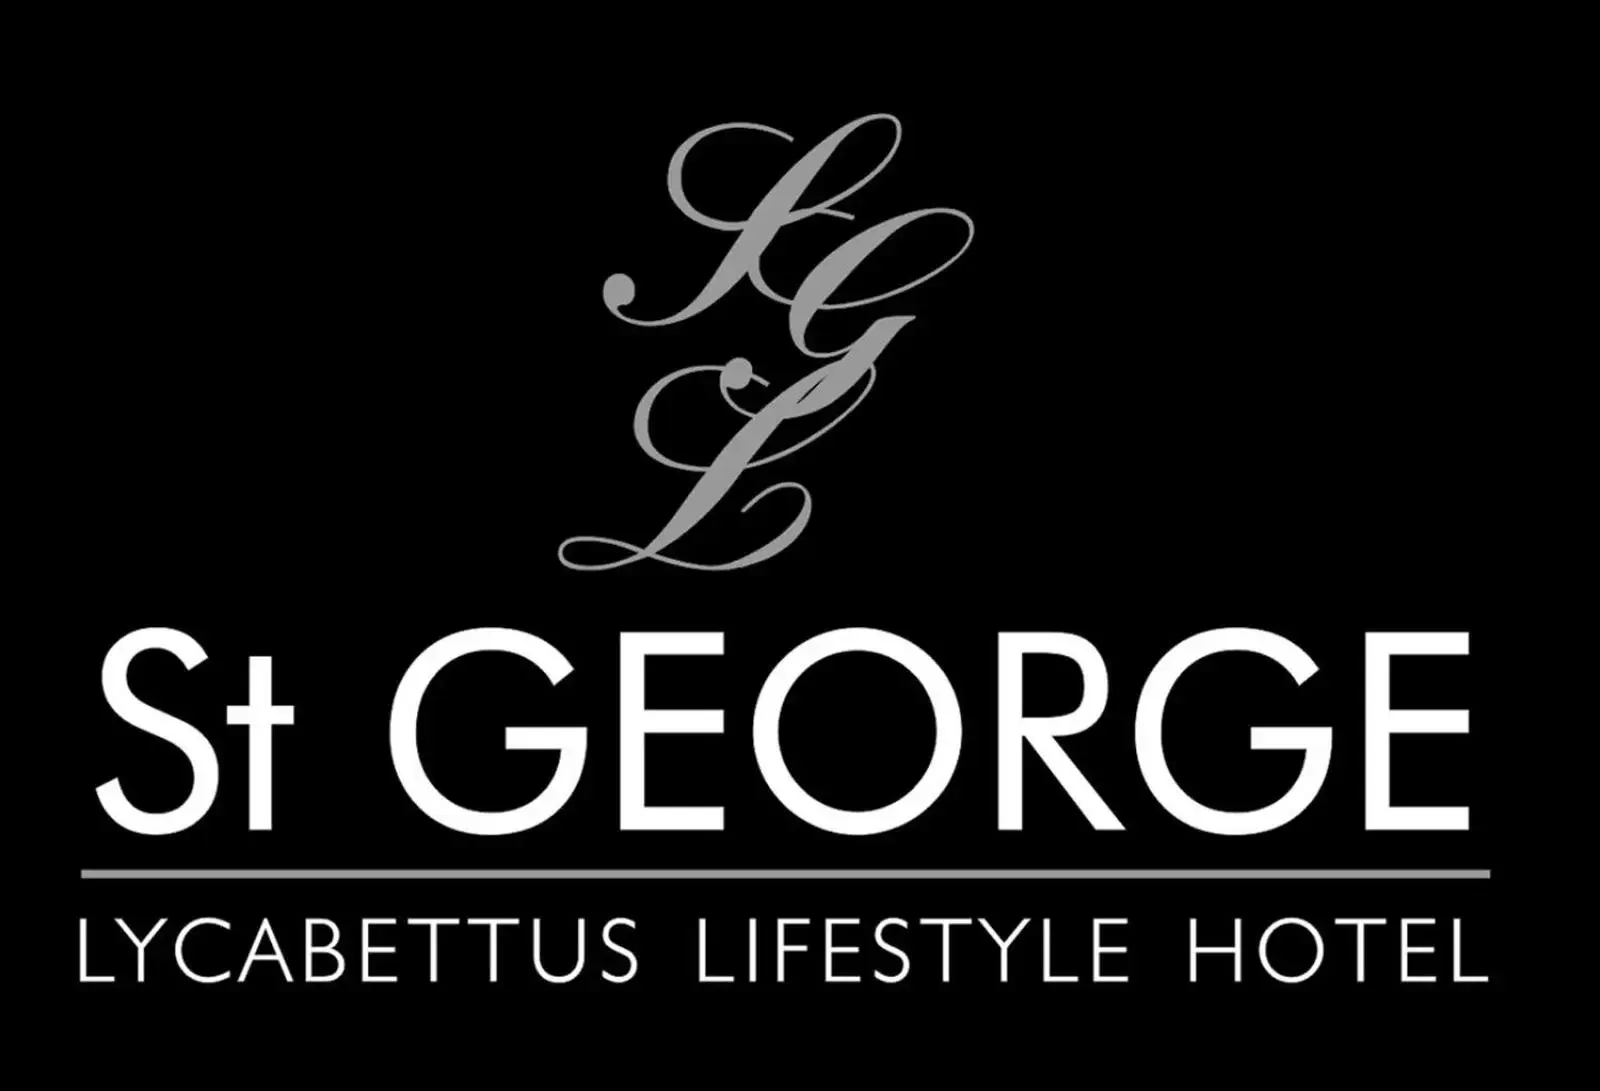 Logo/Certificate/Sign, Property Logo/Sign in St George Lycabettus Lifestyle Hotel